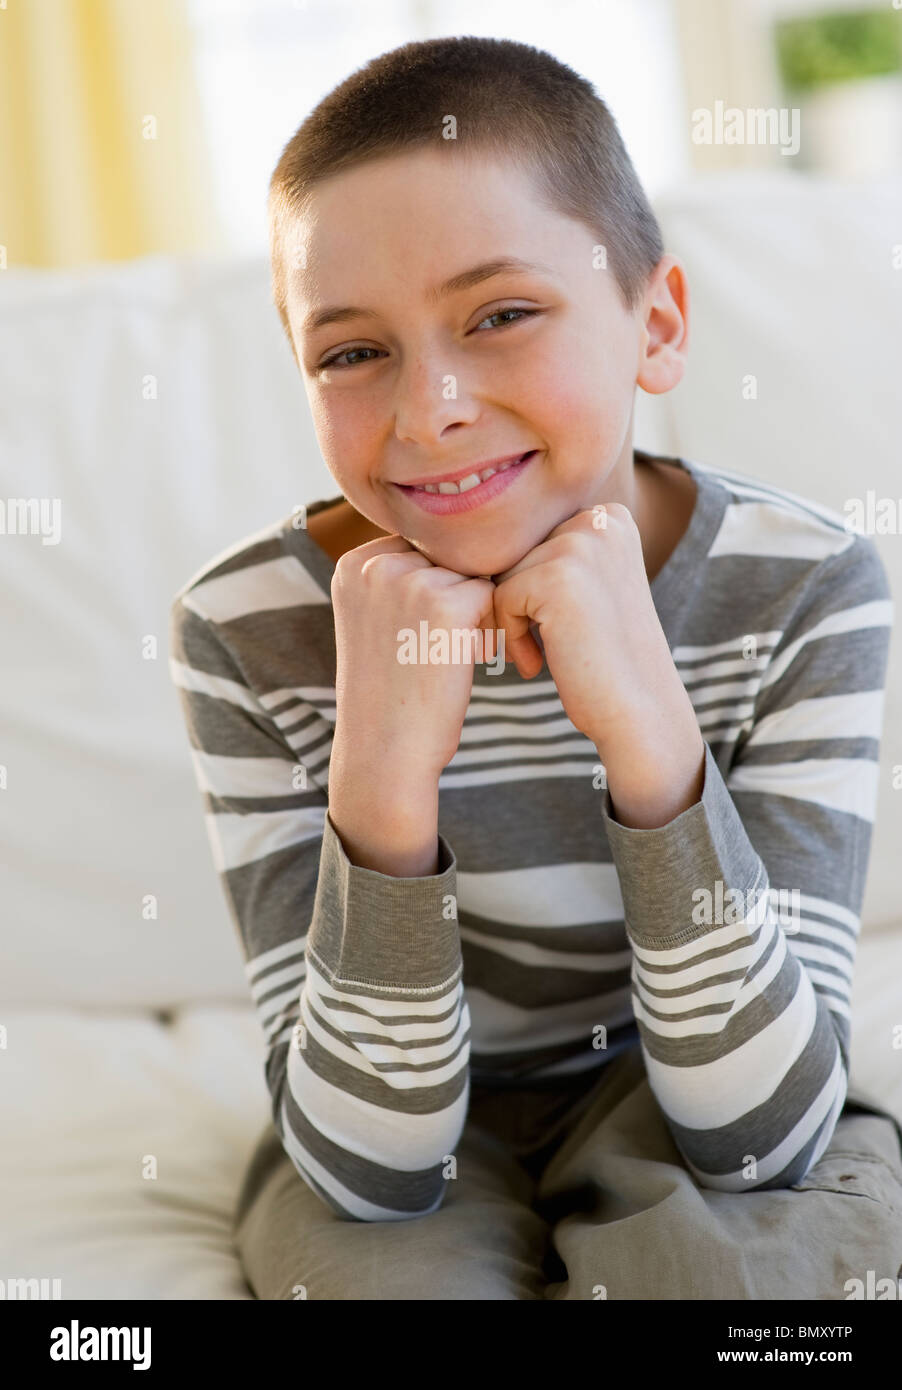 Young boy sitting on couch Stock Photo